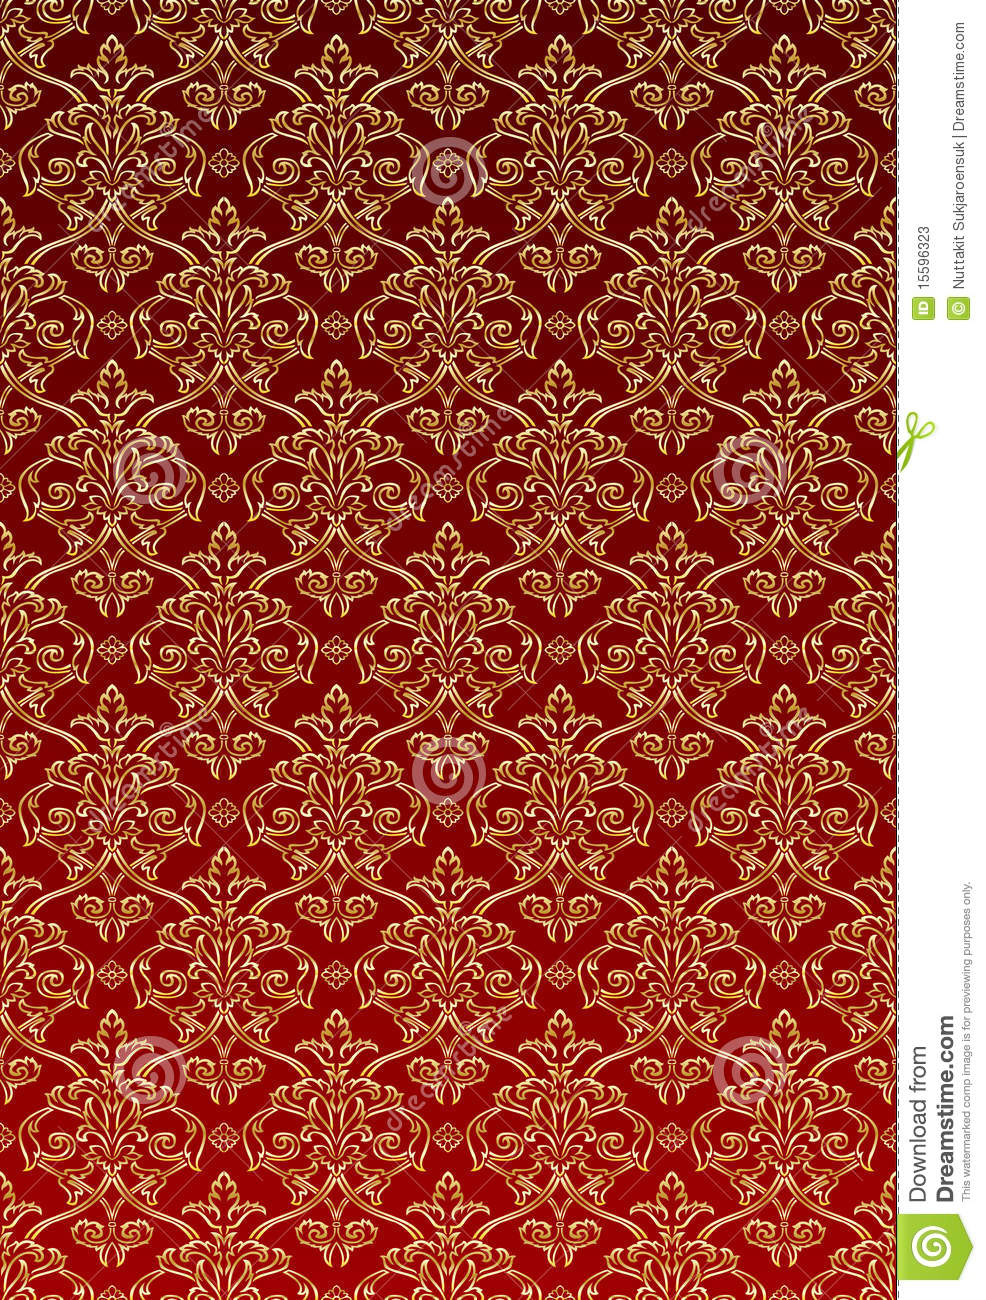 Red And Gold Damask Wallpaper Style